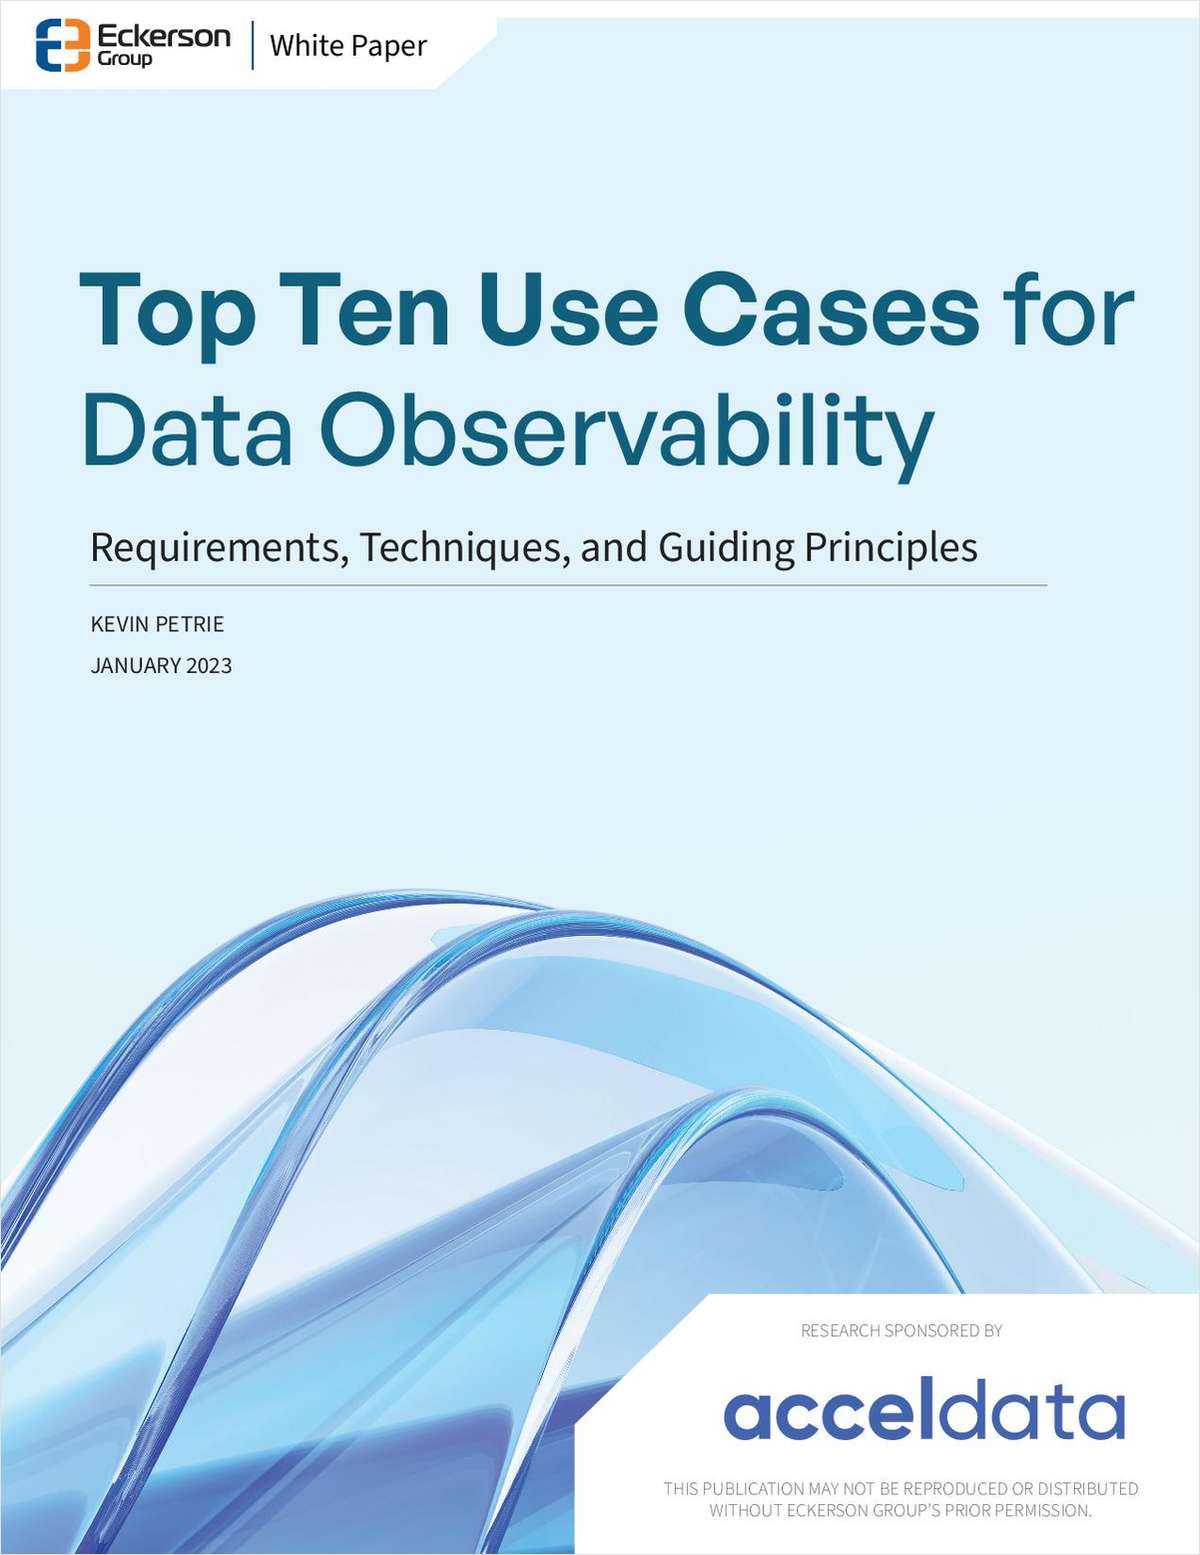 Top 10 Data Observability Use Cases